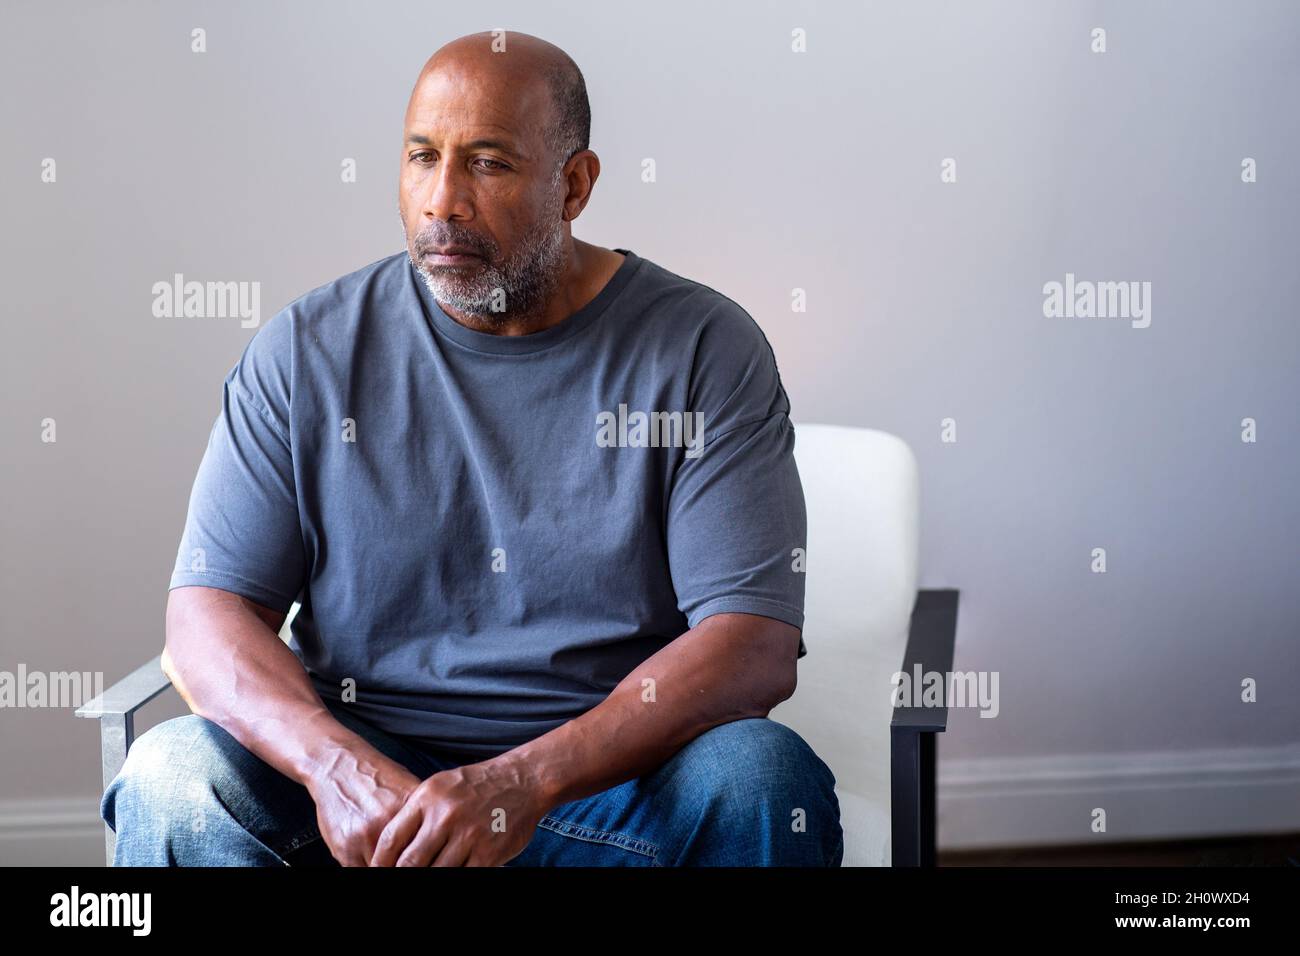 Portrait of a mature man looking sad and away from the camera. Stock Photo